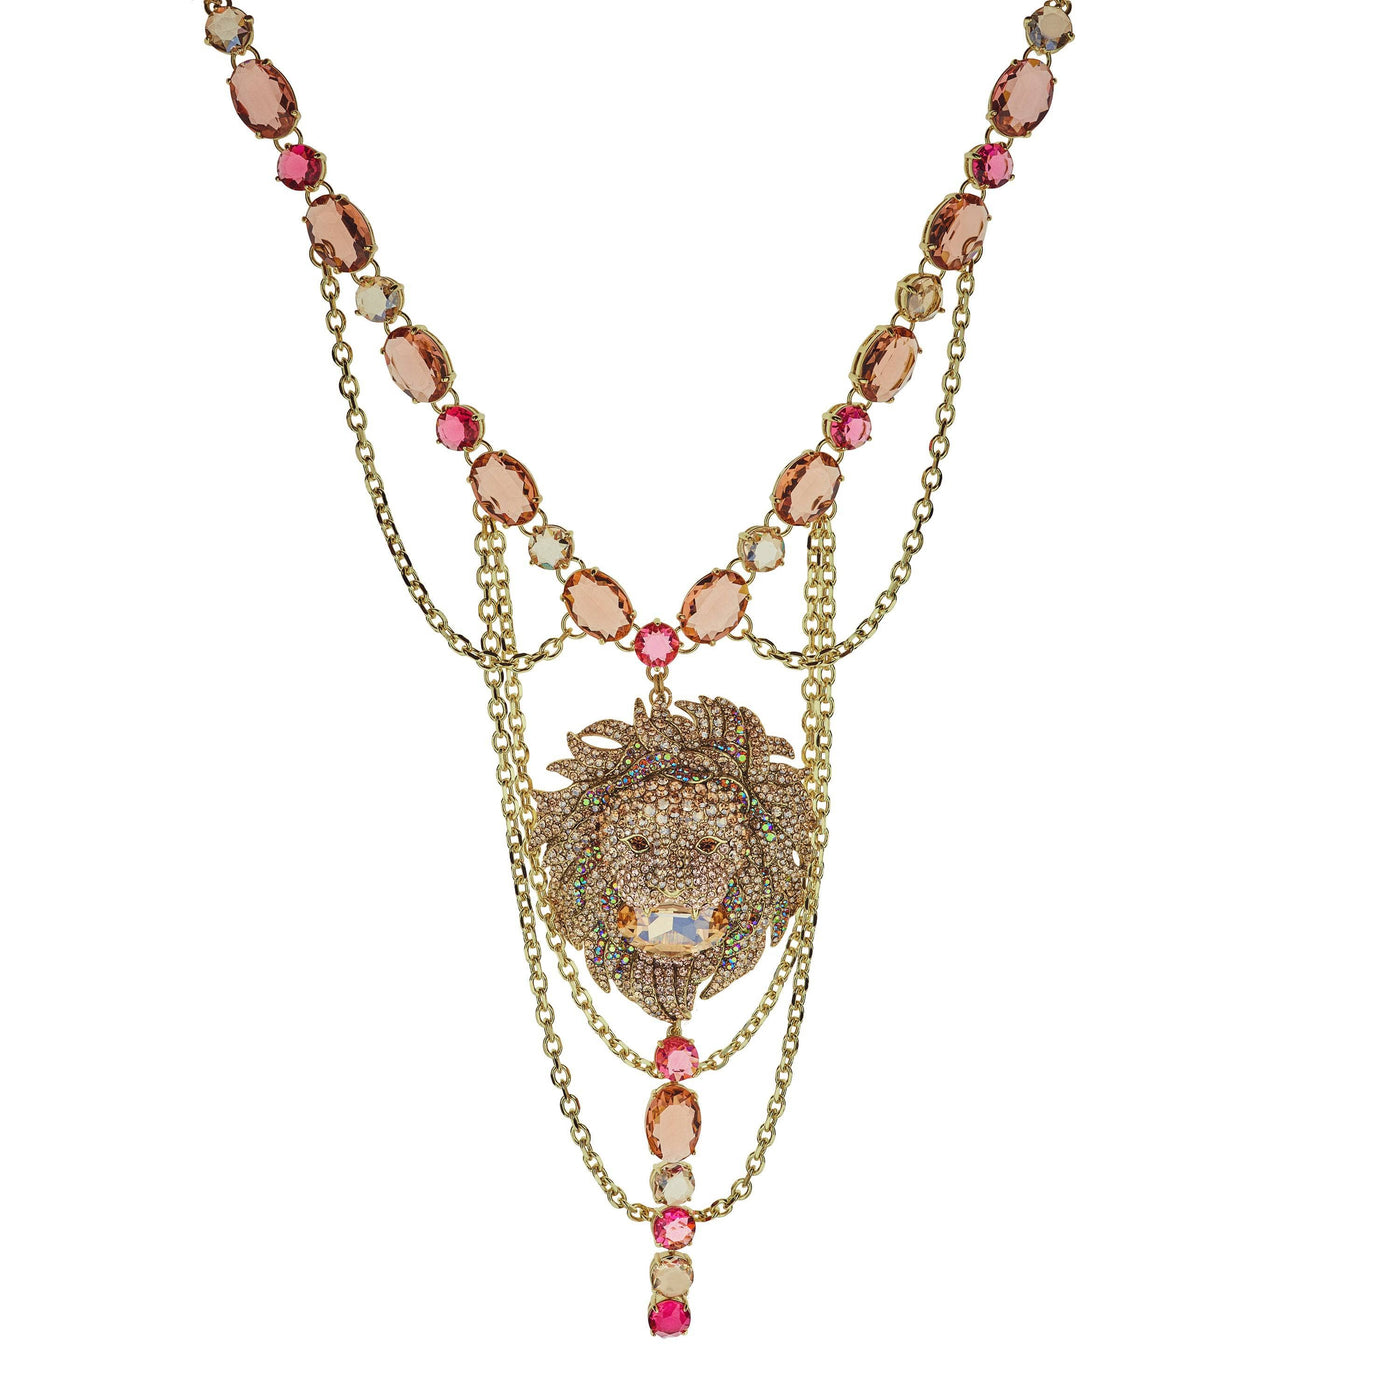 HEIDI DAUS®"Wild Thing" Crystal Chain Lion Necklace